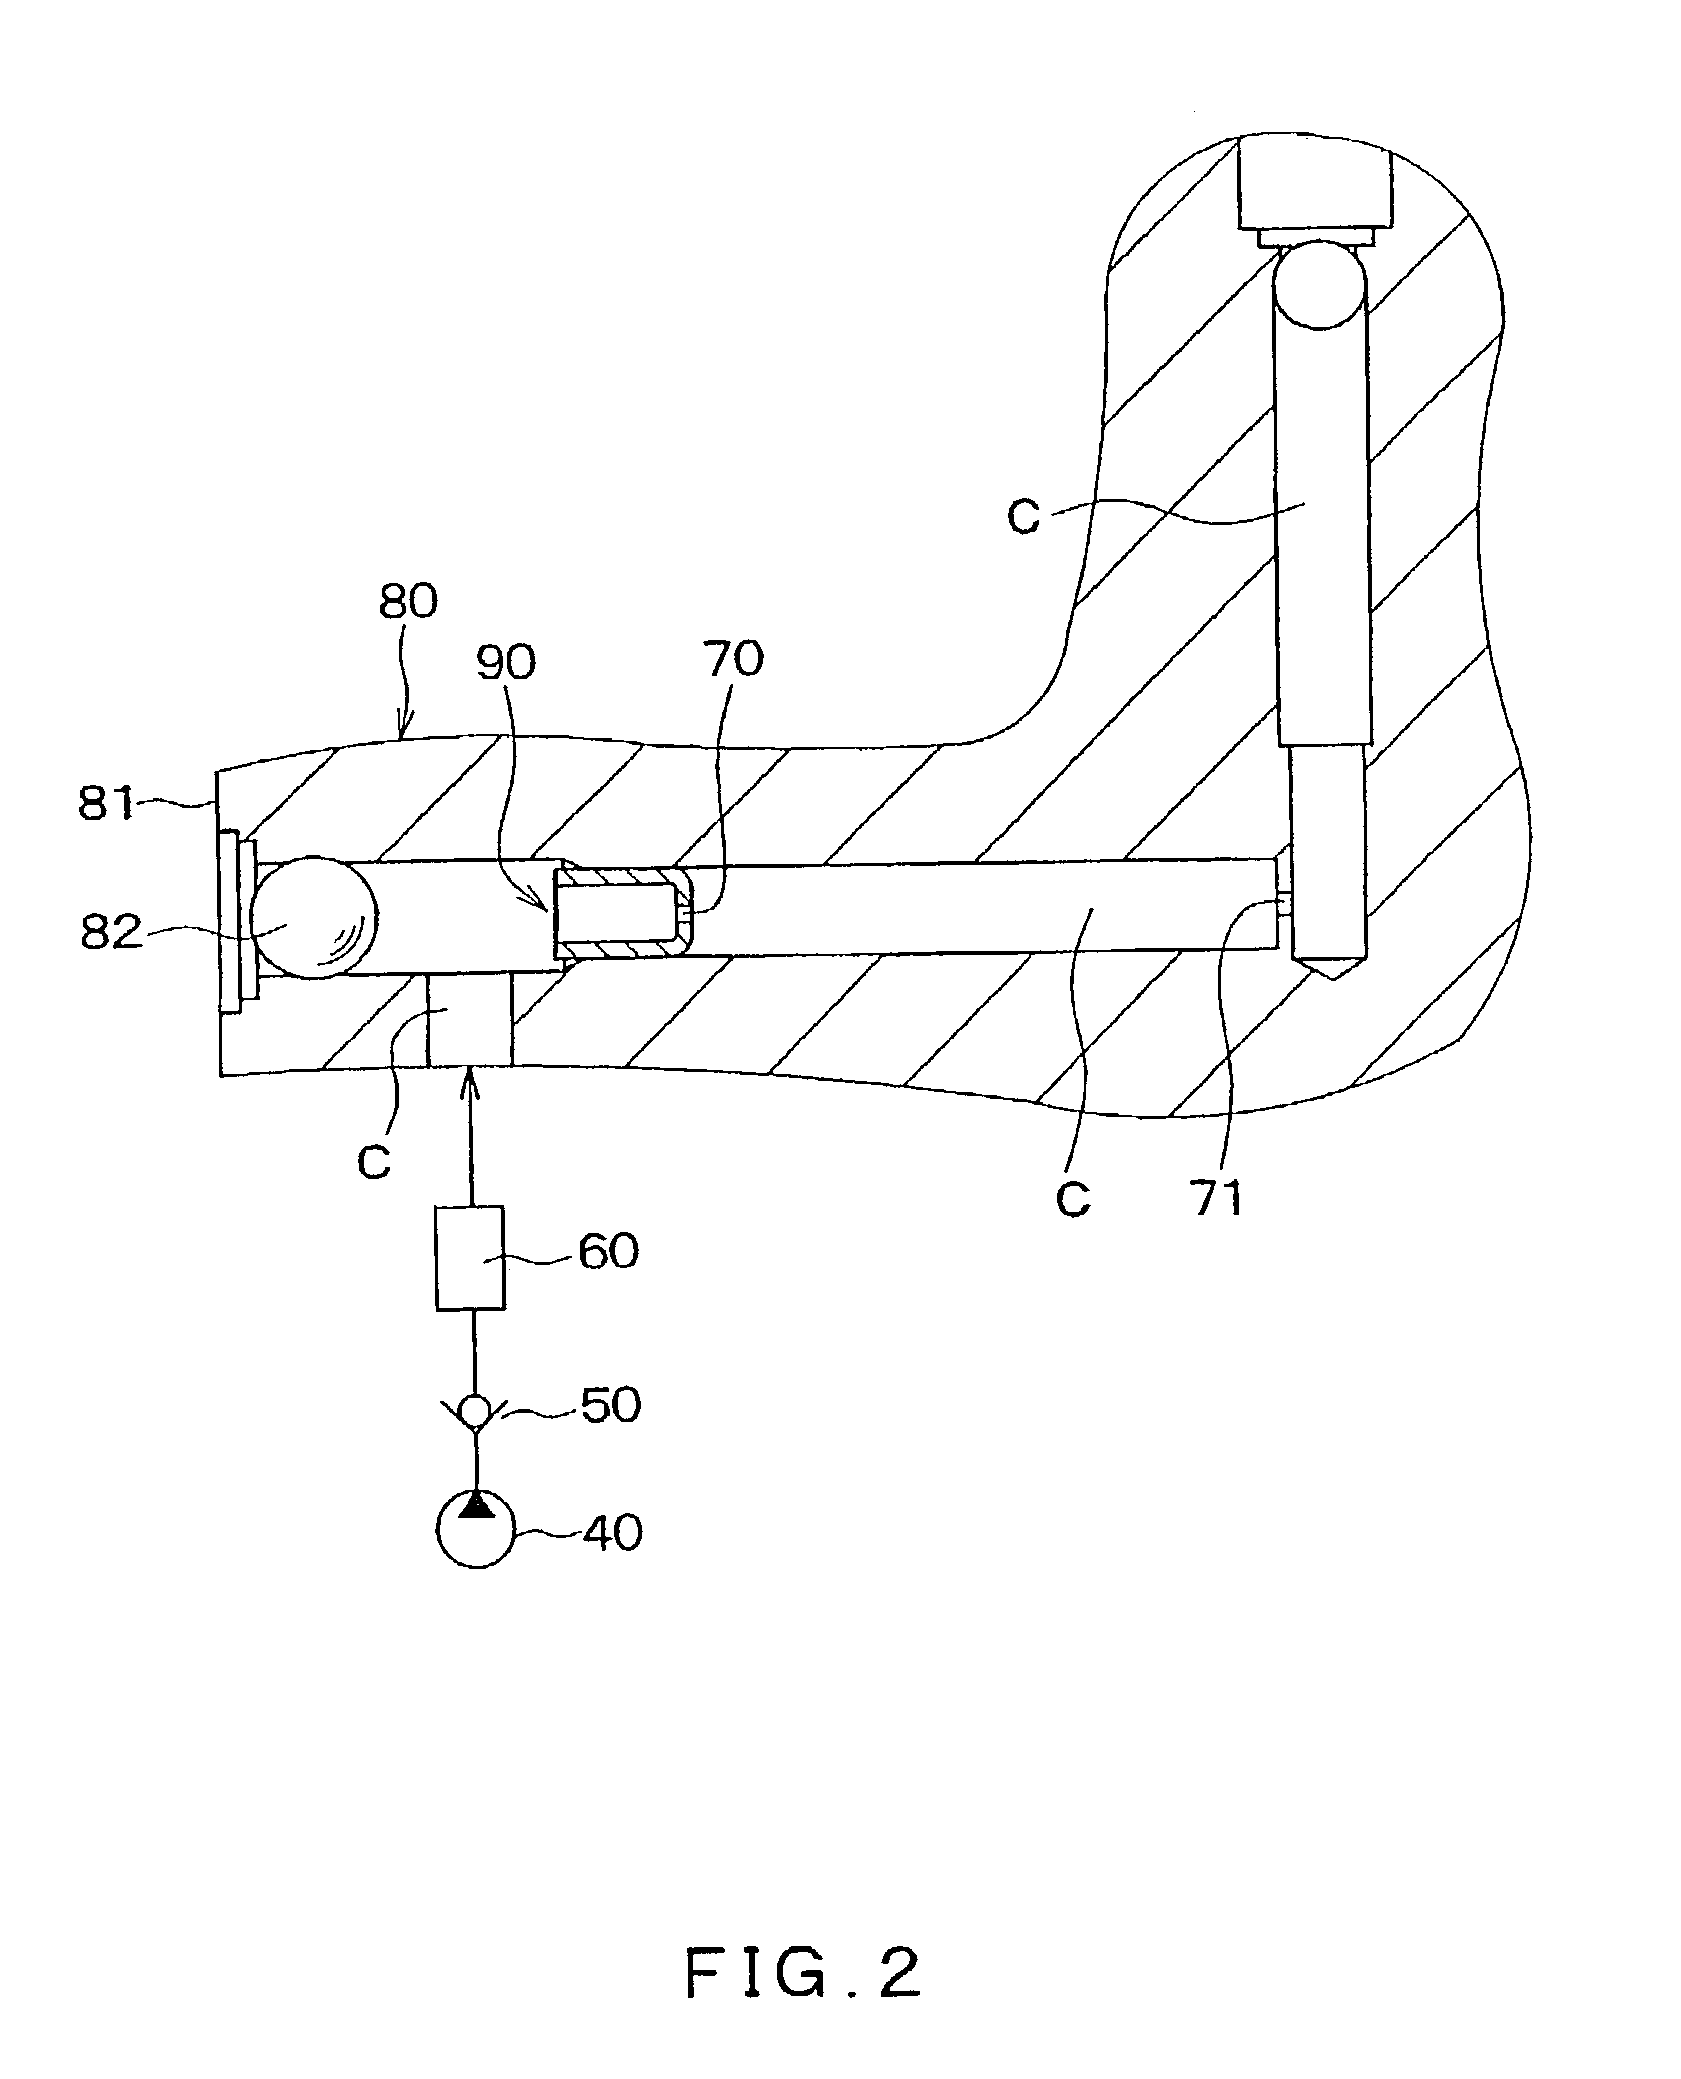 Brake apparatus with orifices for restricting brake fluid pressure pulsation